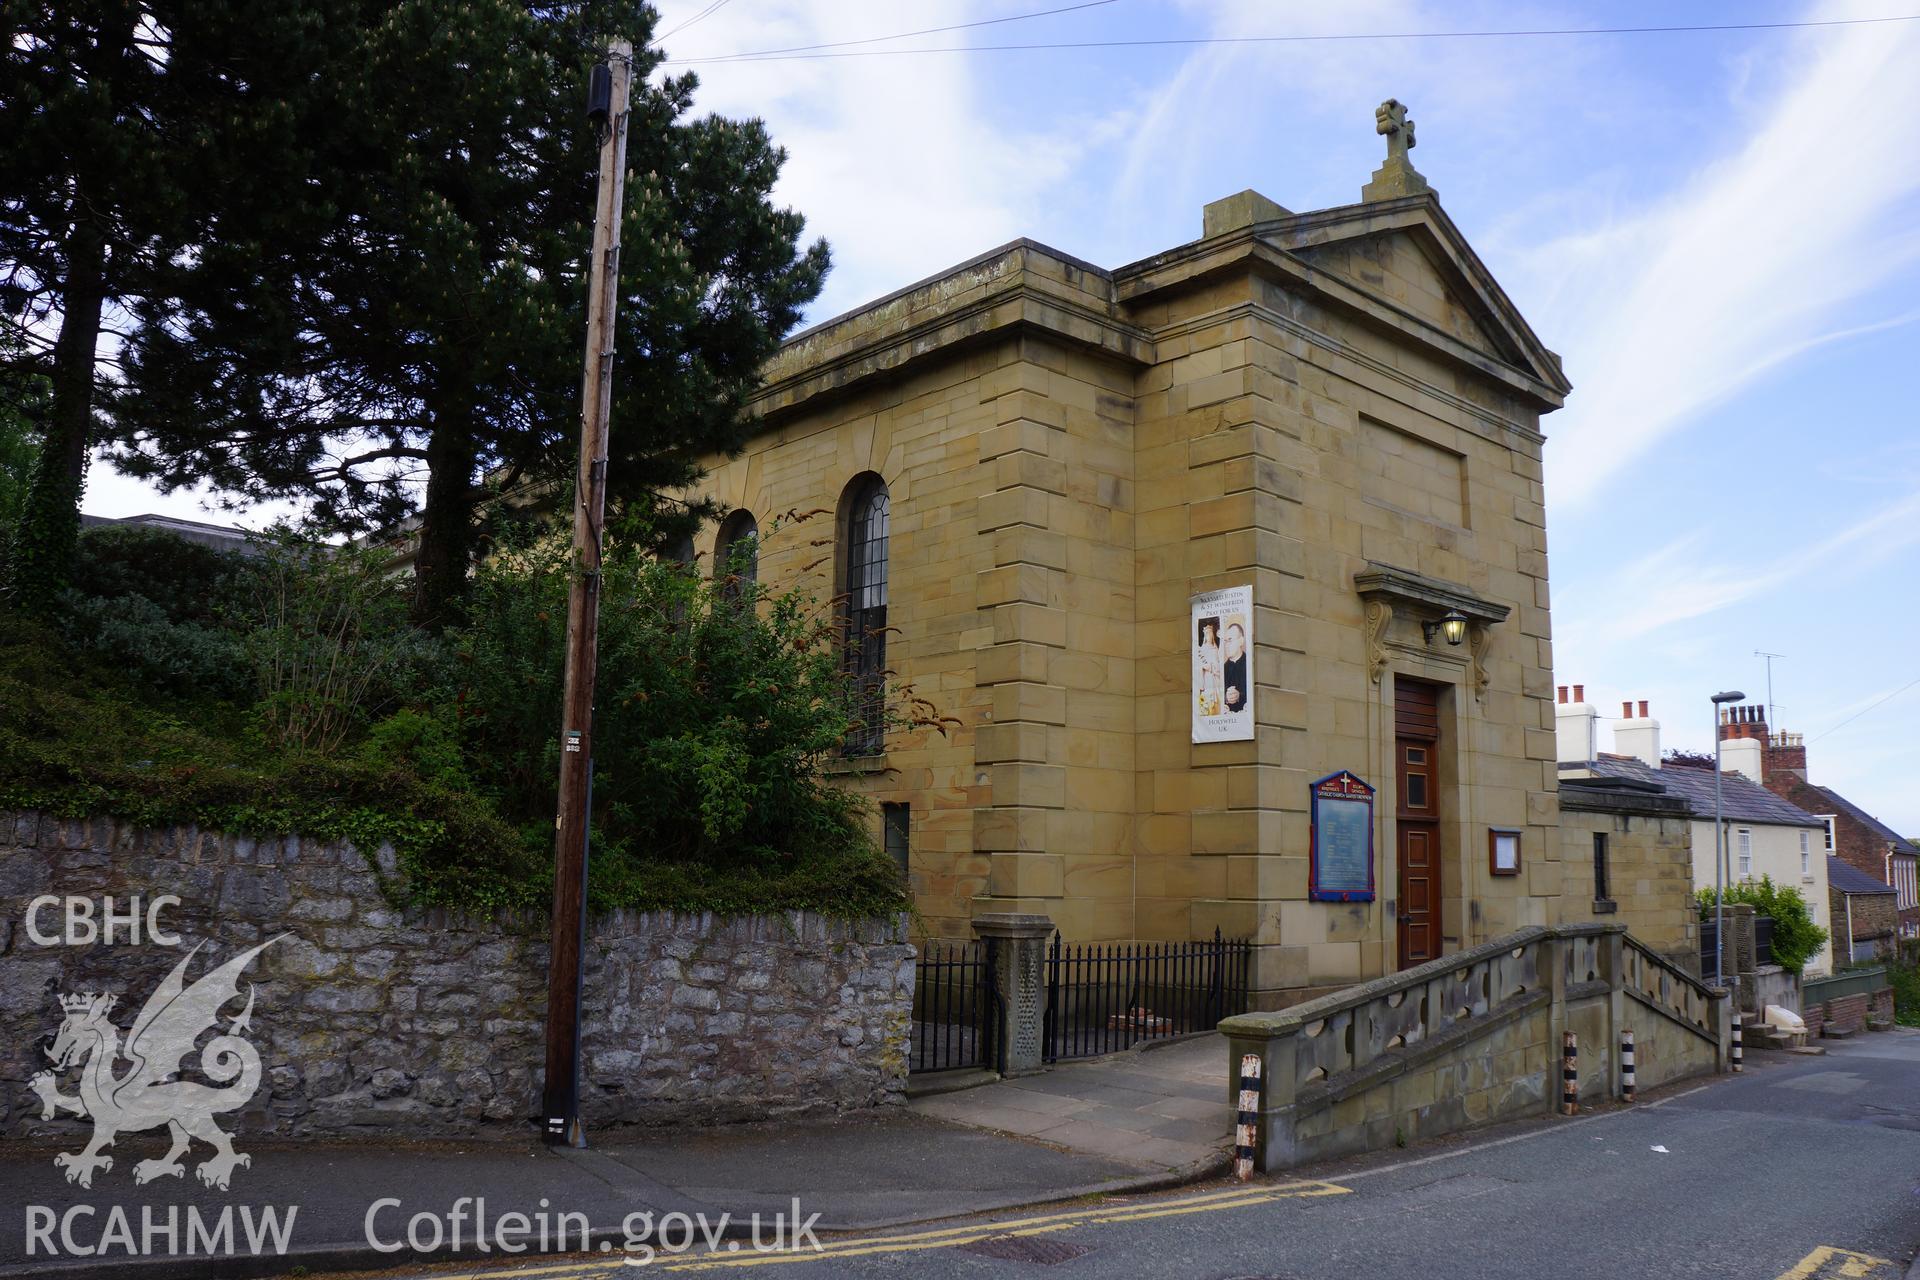 Digital colour photograph showing exterior of St Winefride's Catholic church, Holywell.